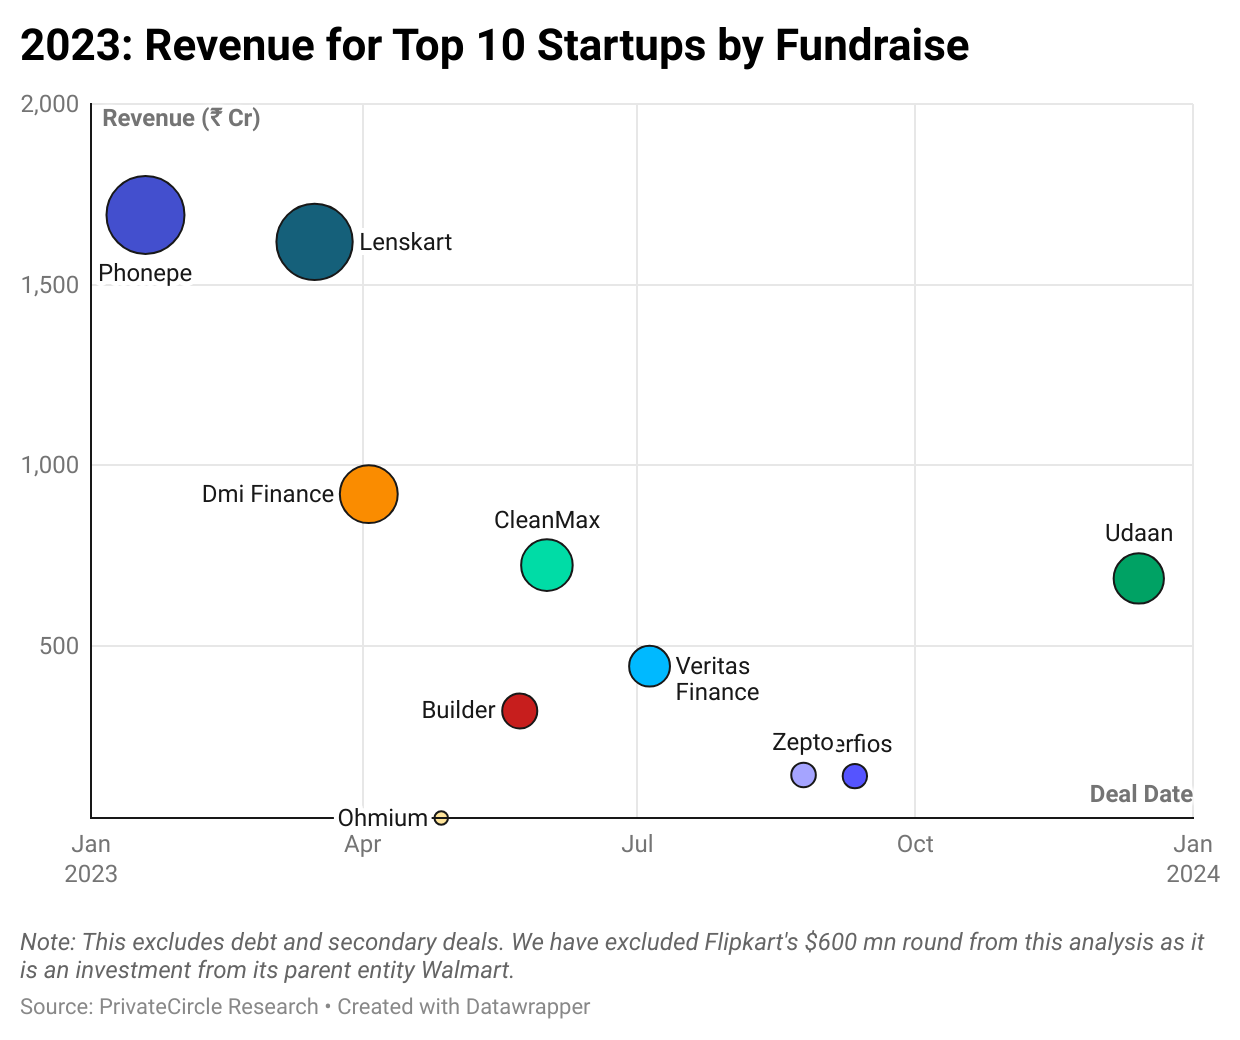 2023: Revenue for Top 10 Startups by Fundraise.

PhonePe had the highest revenue among these top 10 startups by amount raised in FY22. All revenue numbers are for FY22.